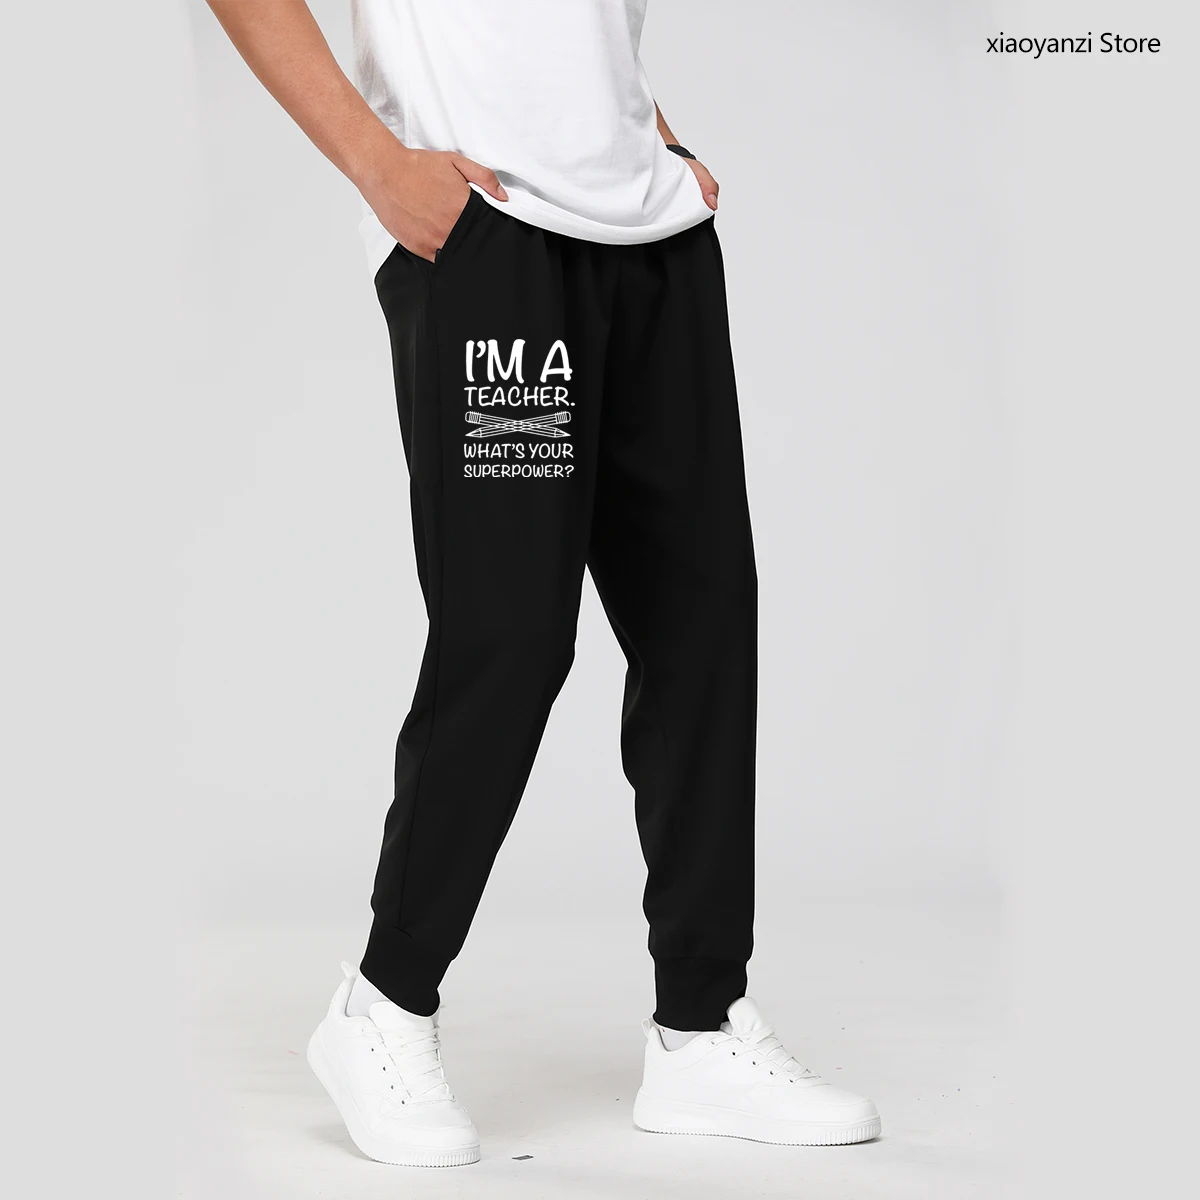 

I'M TEACHER WHAT'S YOUR SUPERPOWER Letter Print Funny Men Women Sweatpants Casual Fitness Long Pants Running Trousers OU-77-40